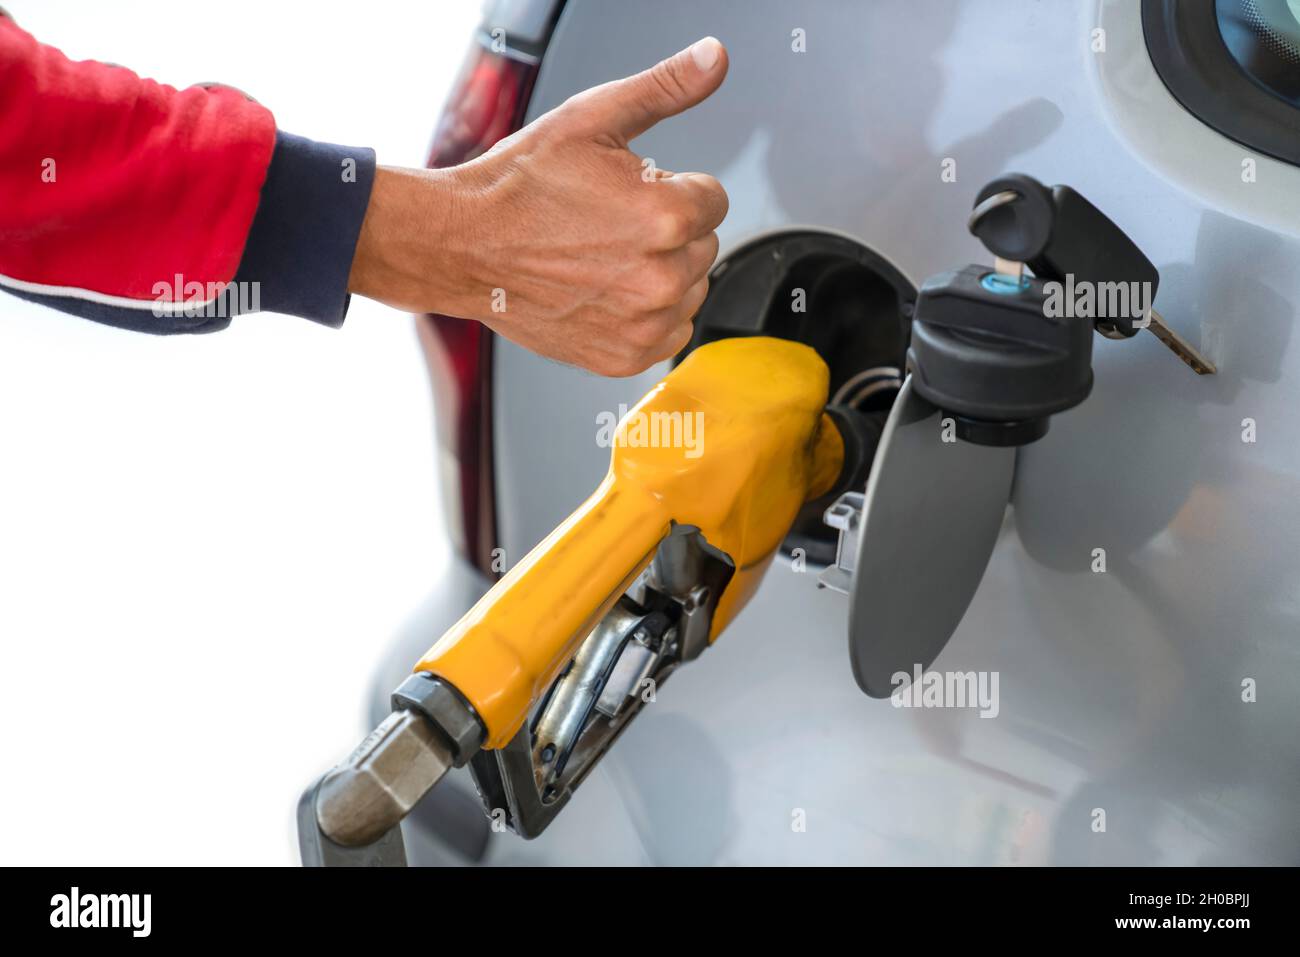 Man's hand with raised finger up, next to refueling gun, while refueling car with gasoline fuel -concept of high-quality service and fuel. Close-up. Stock Photo